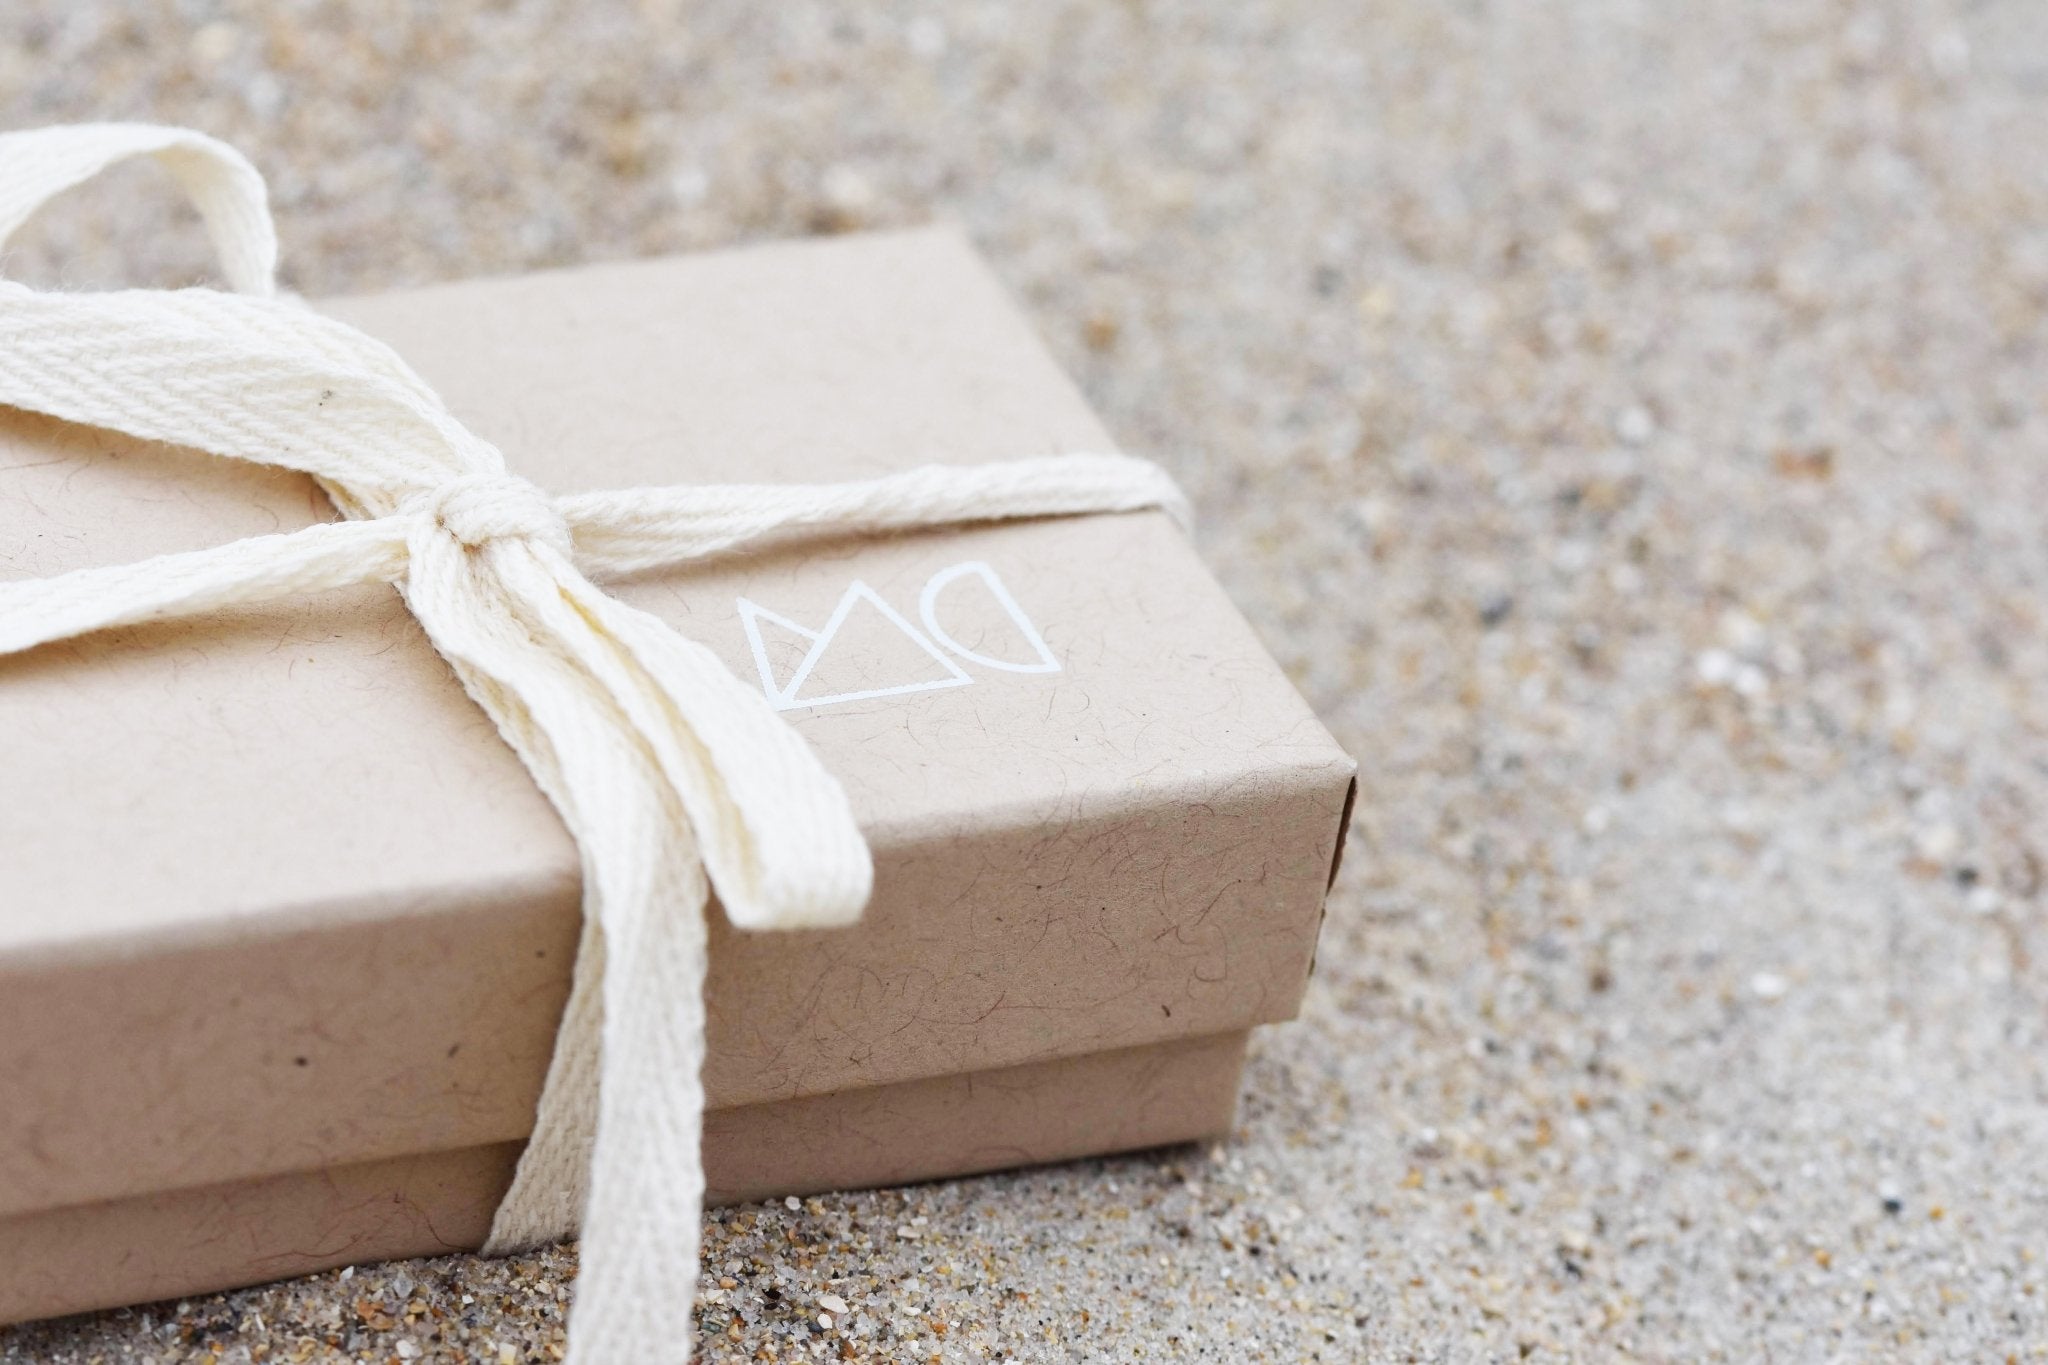 Eco-friendly packaging by Megan Collins Jewellery